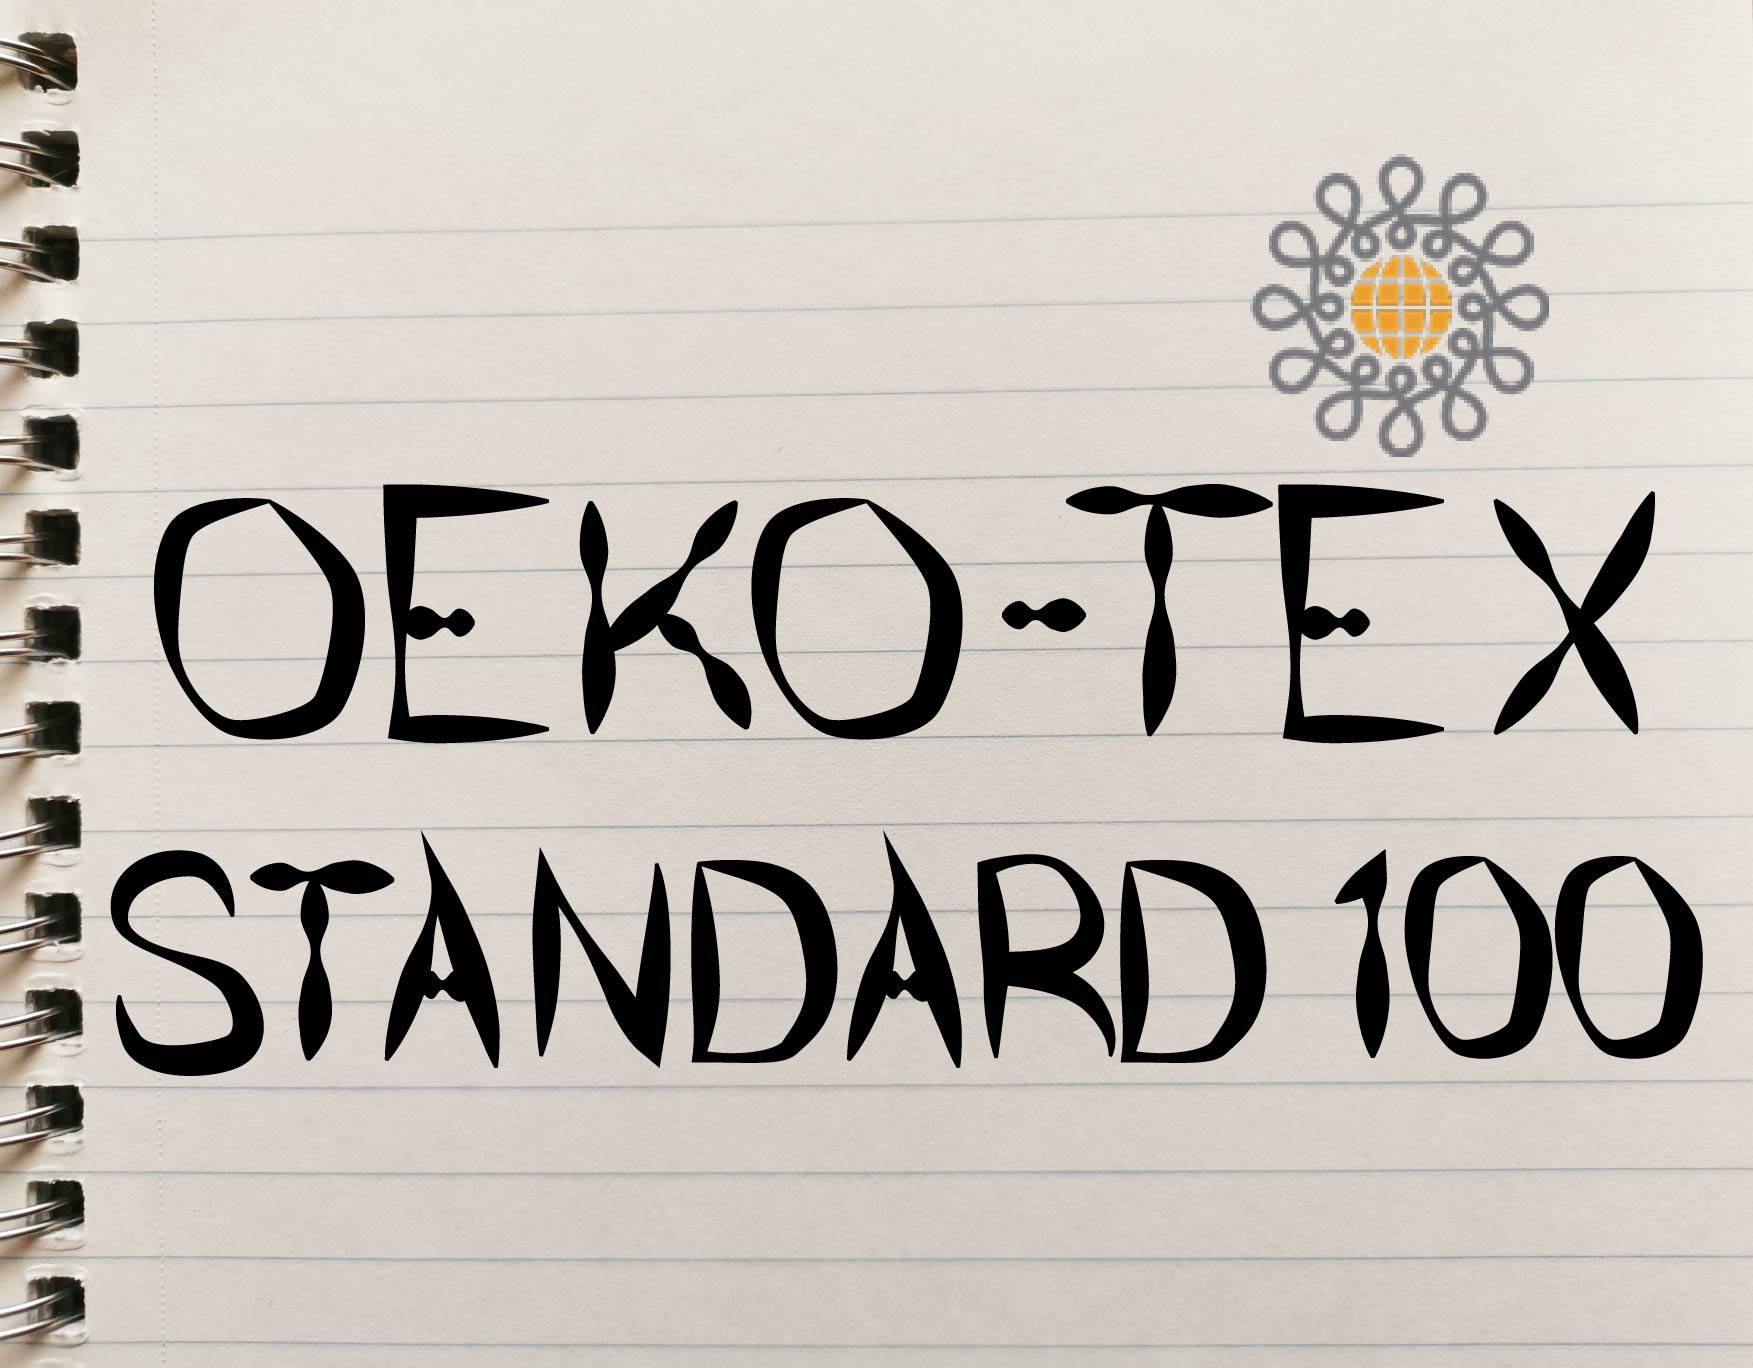 A brief introduction to Oeko-tex